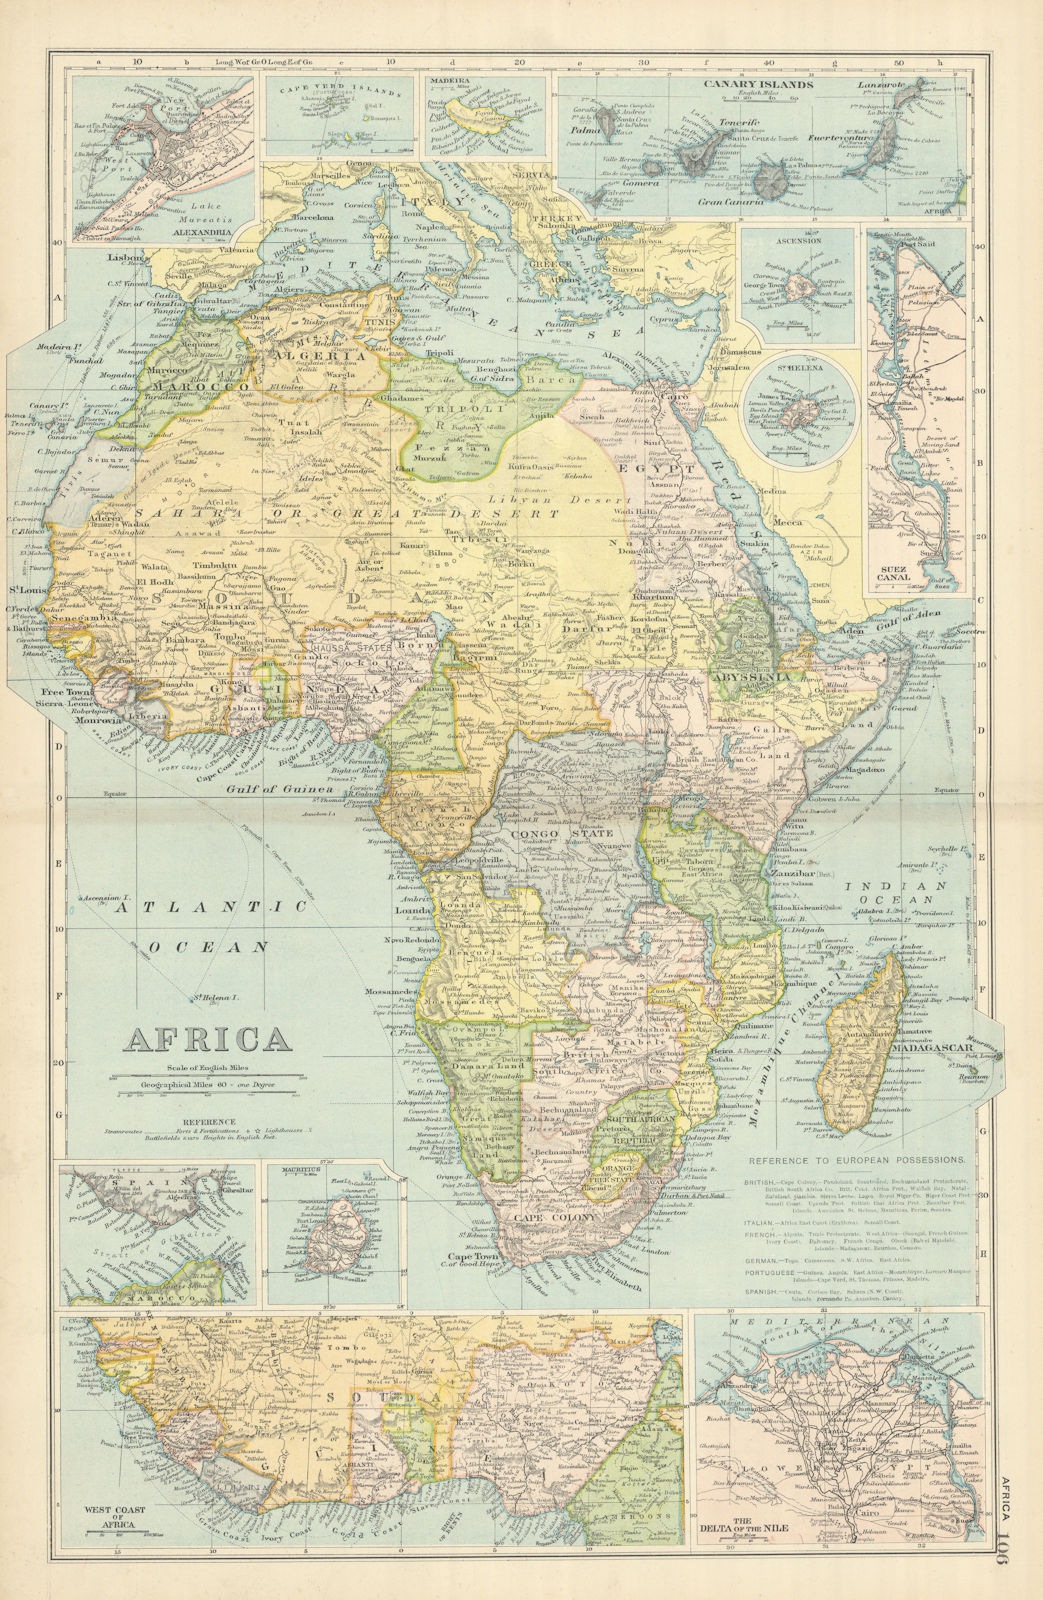 Associate Product AFRICA French Congo State Soudan Nile Delta Suez canal by GW BACON 1898 map